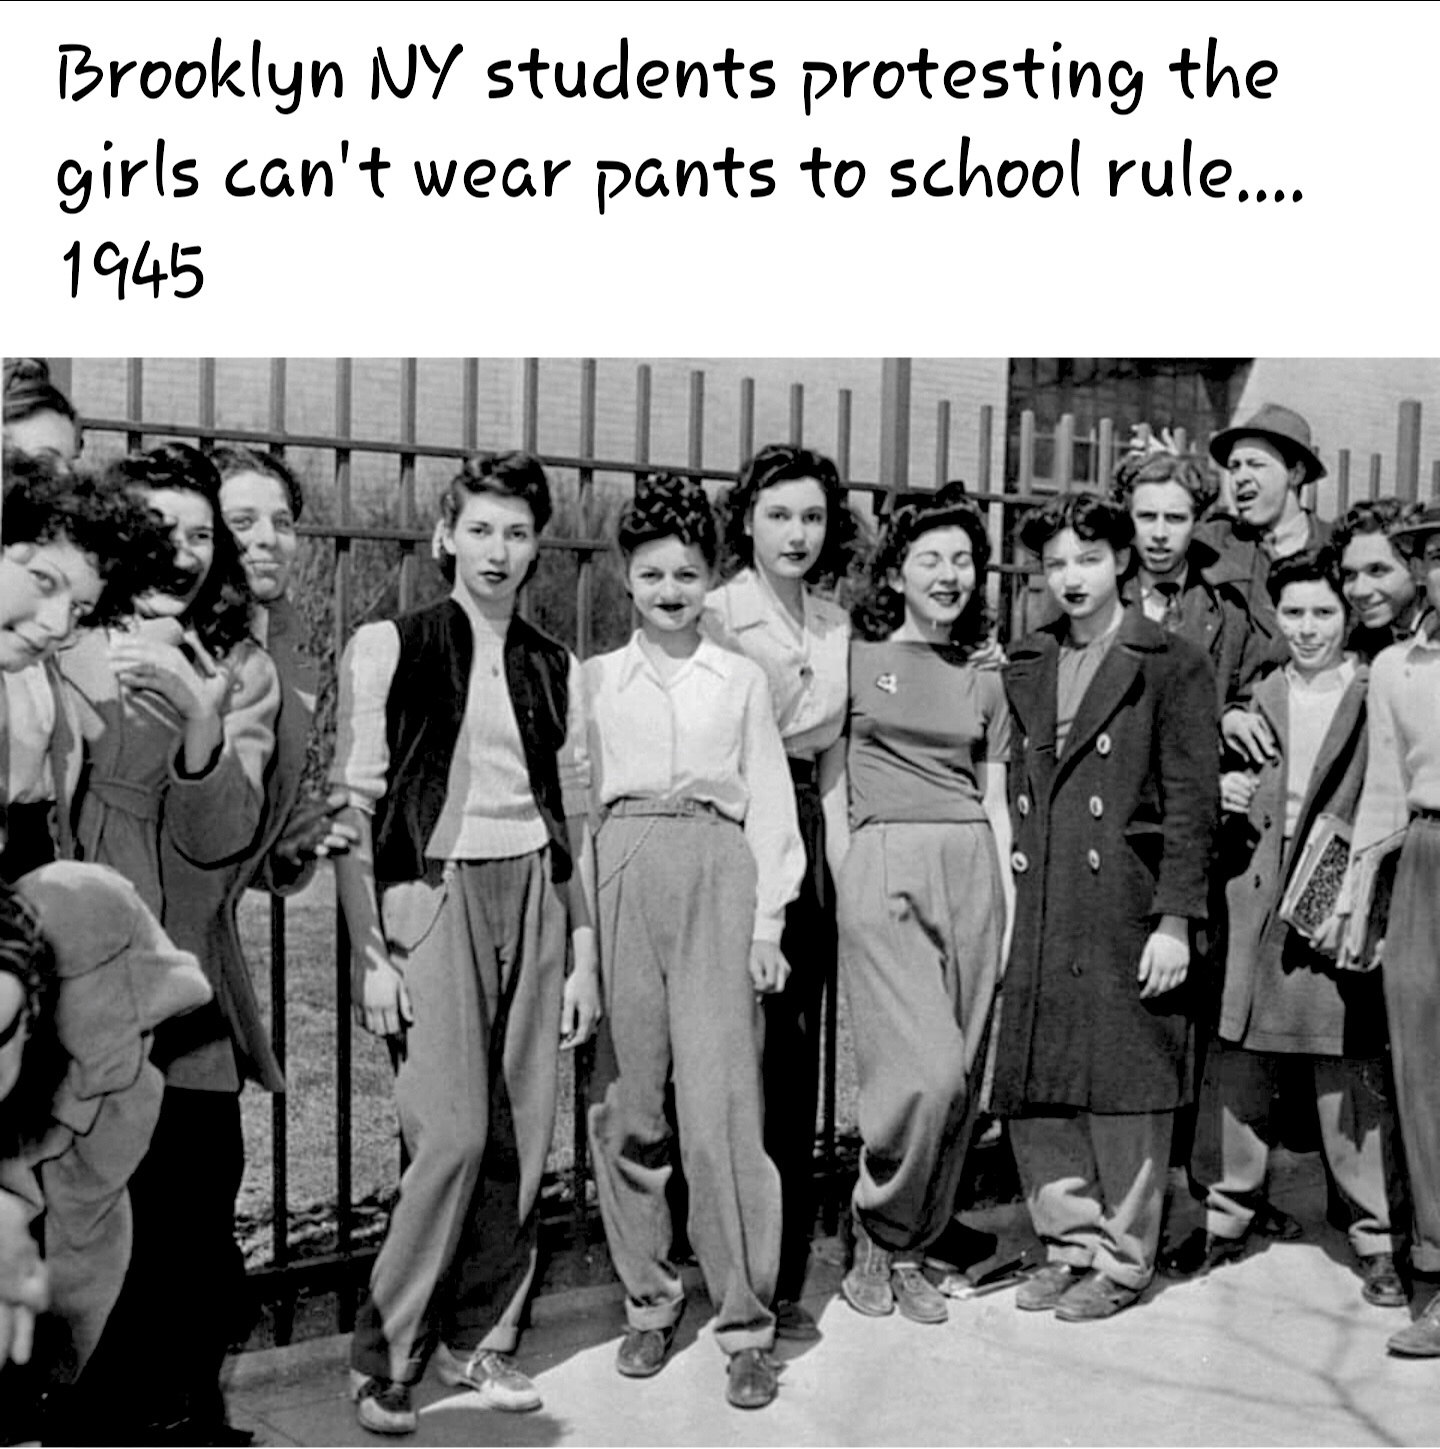 high school dress code 1940s - Brooklyn Ny students protesting the girls can't wear pants to school rule... 1945